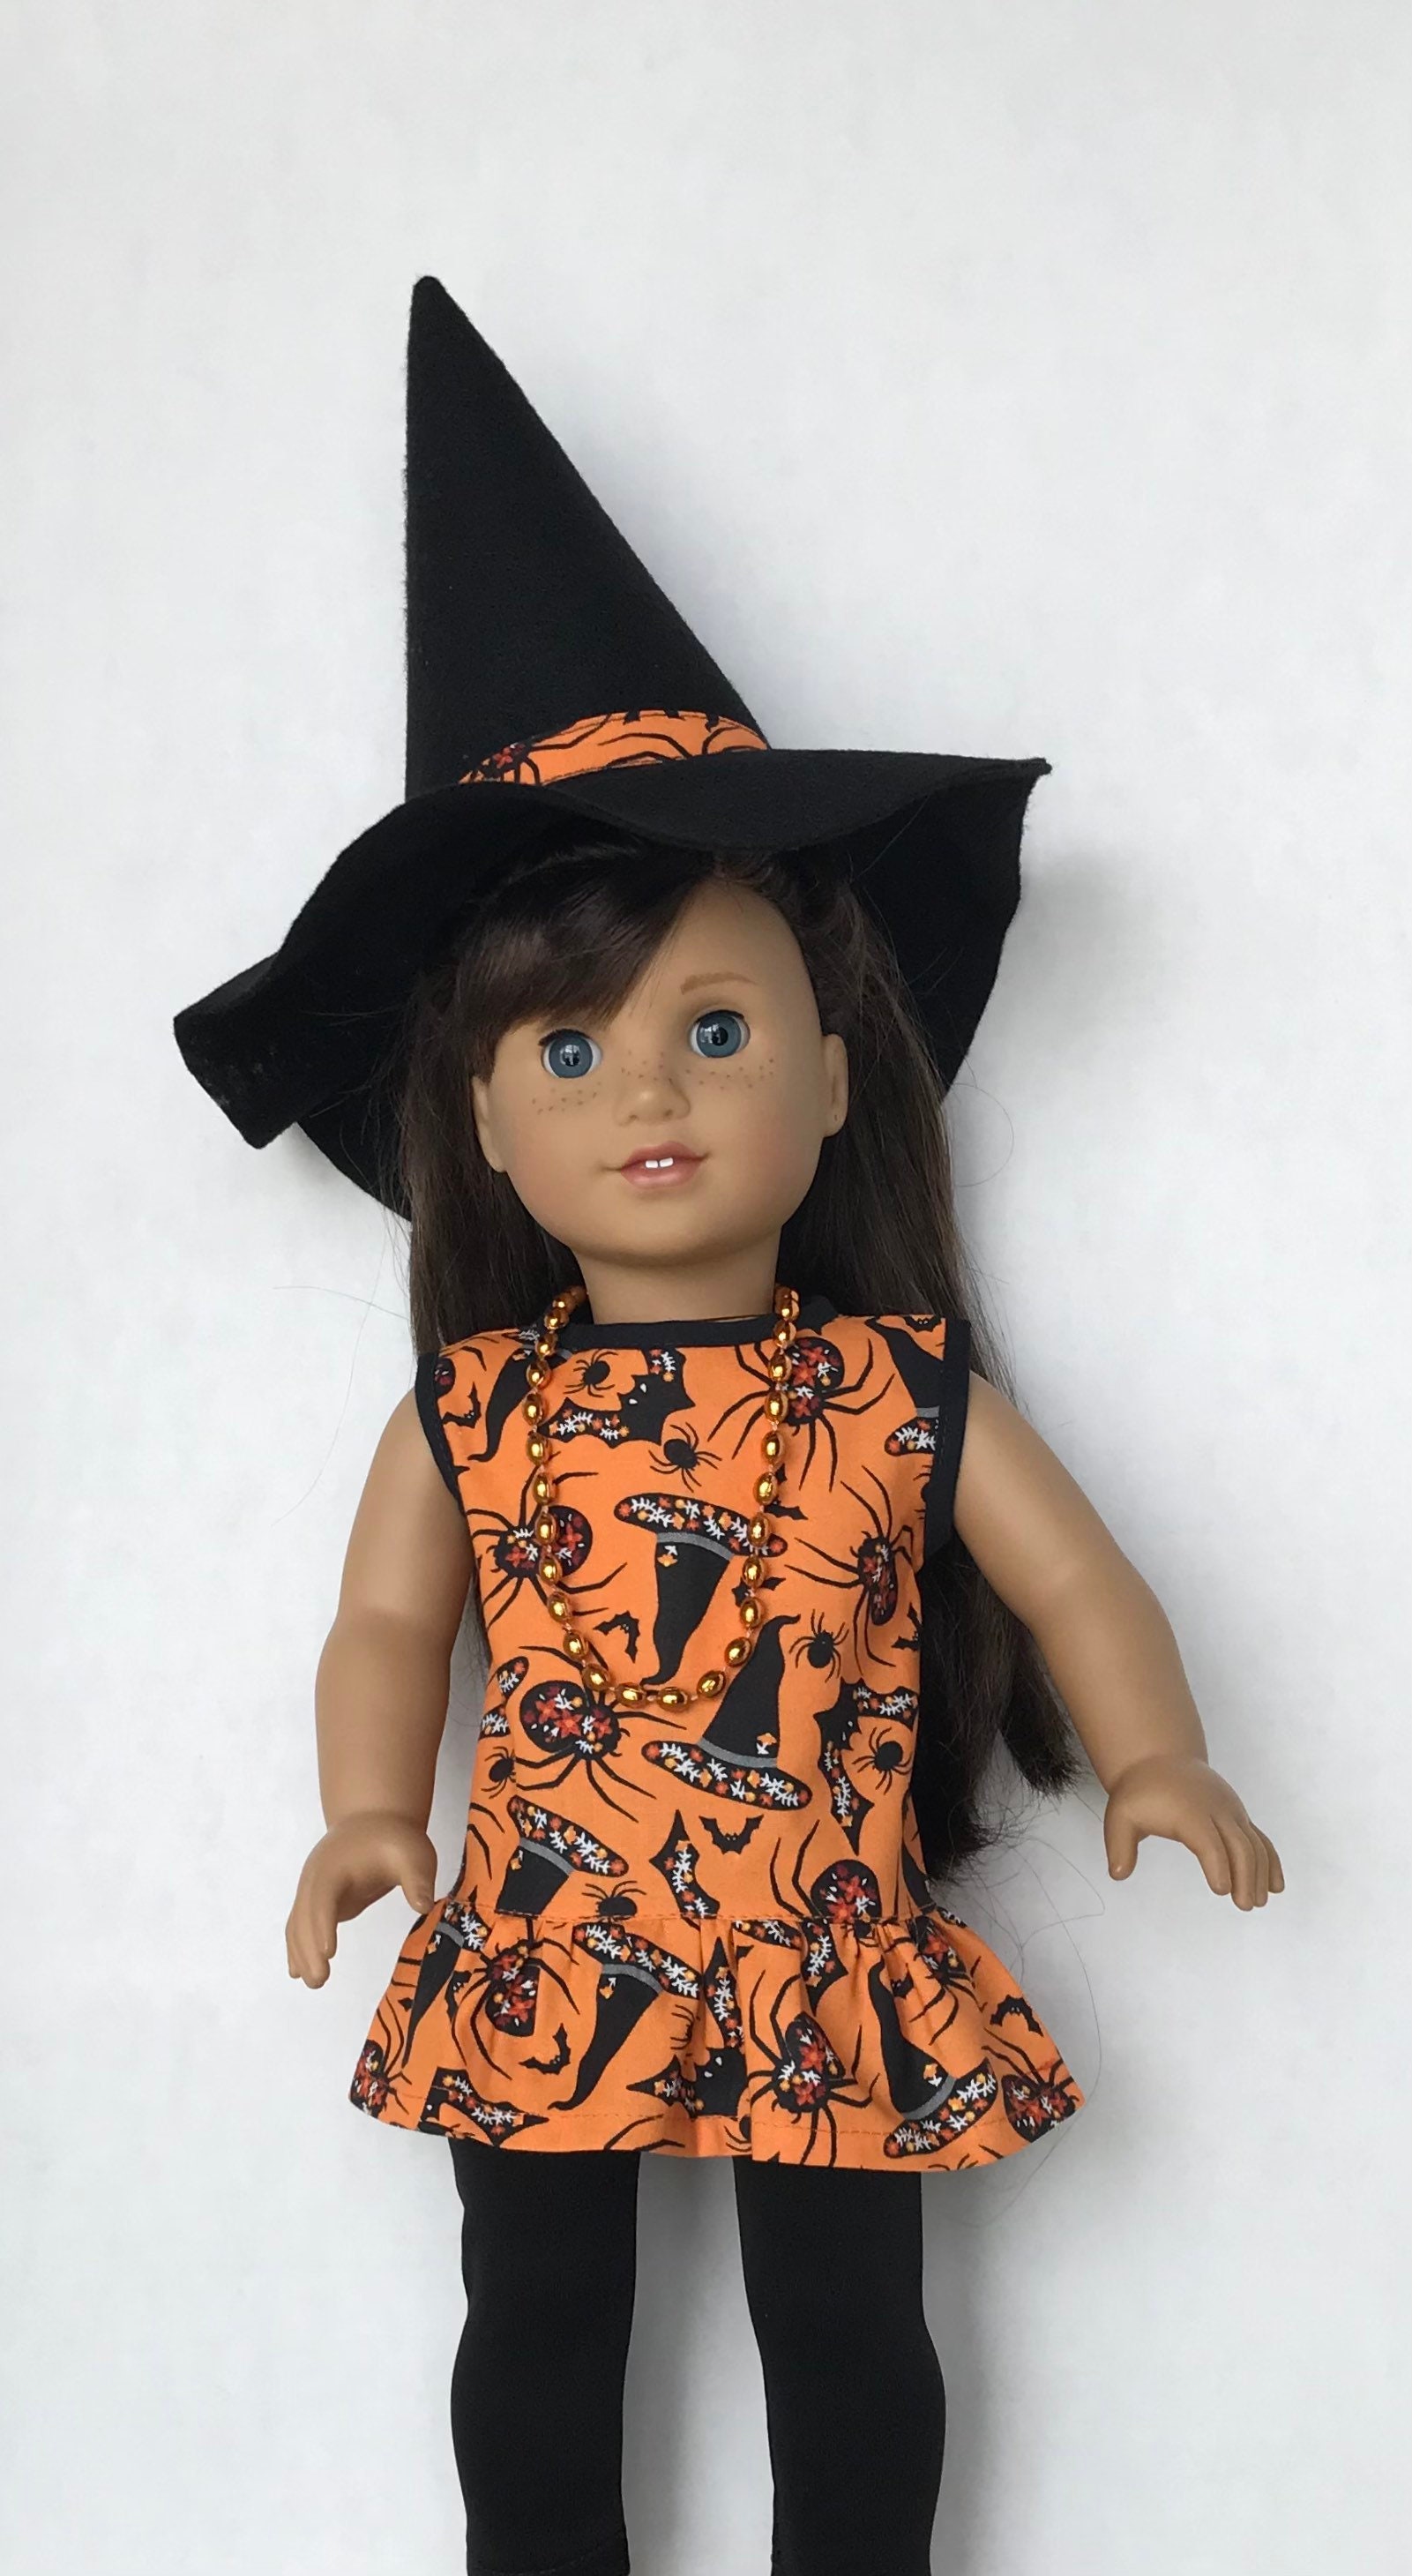  G.C 18 inch Girl Doll Clothes Pumpkin Halloween Costumes,  Sleeveless Romper Outfit with Hat Socks Pumpkin Bag Baby Doll Clothes and  Accessories for 18 inch Dolls : Toys & Games